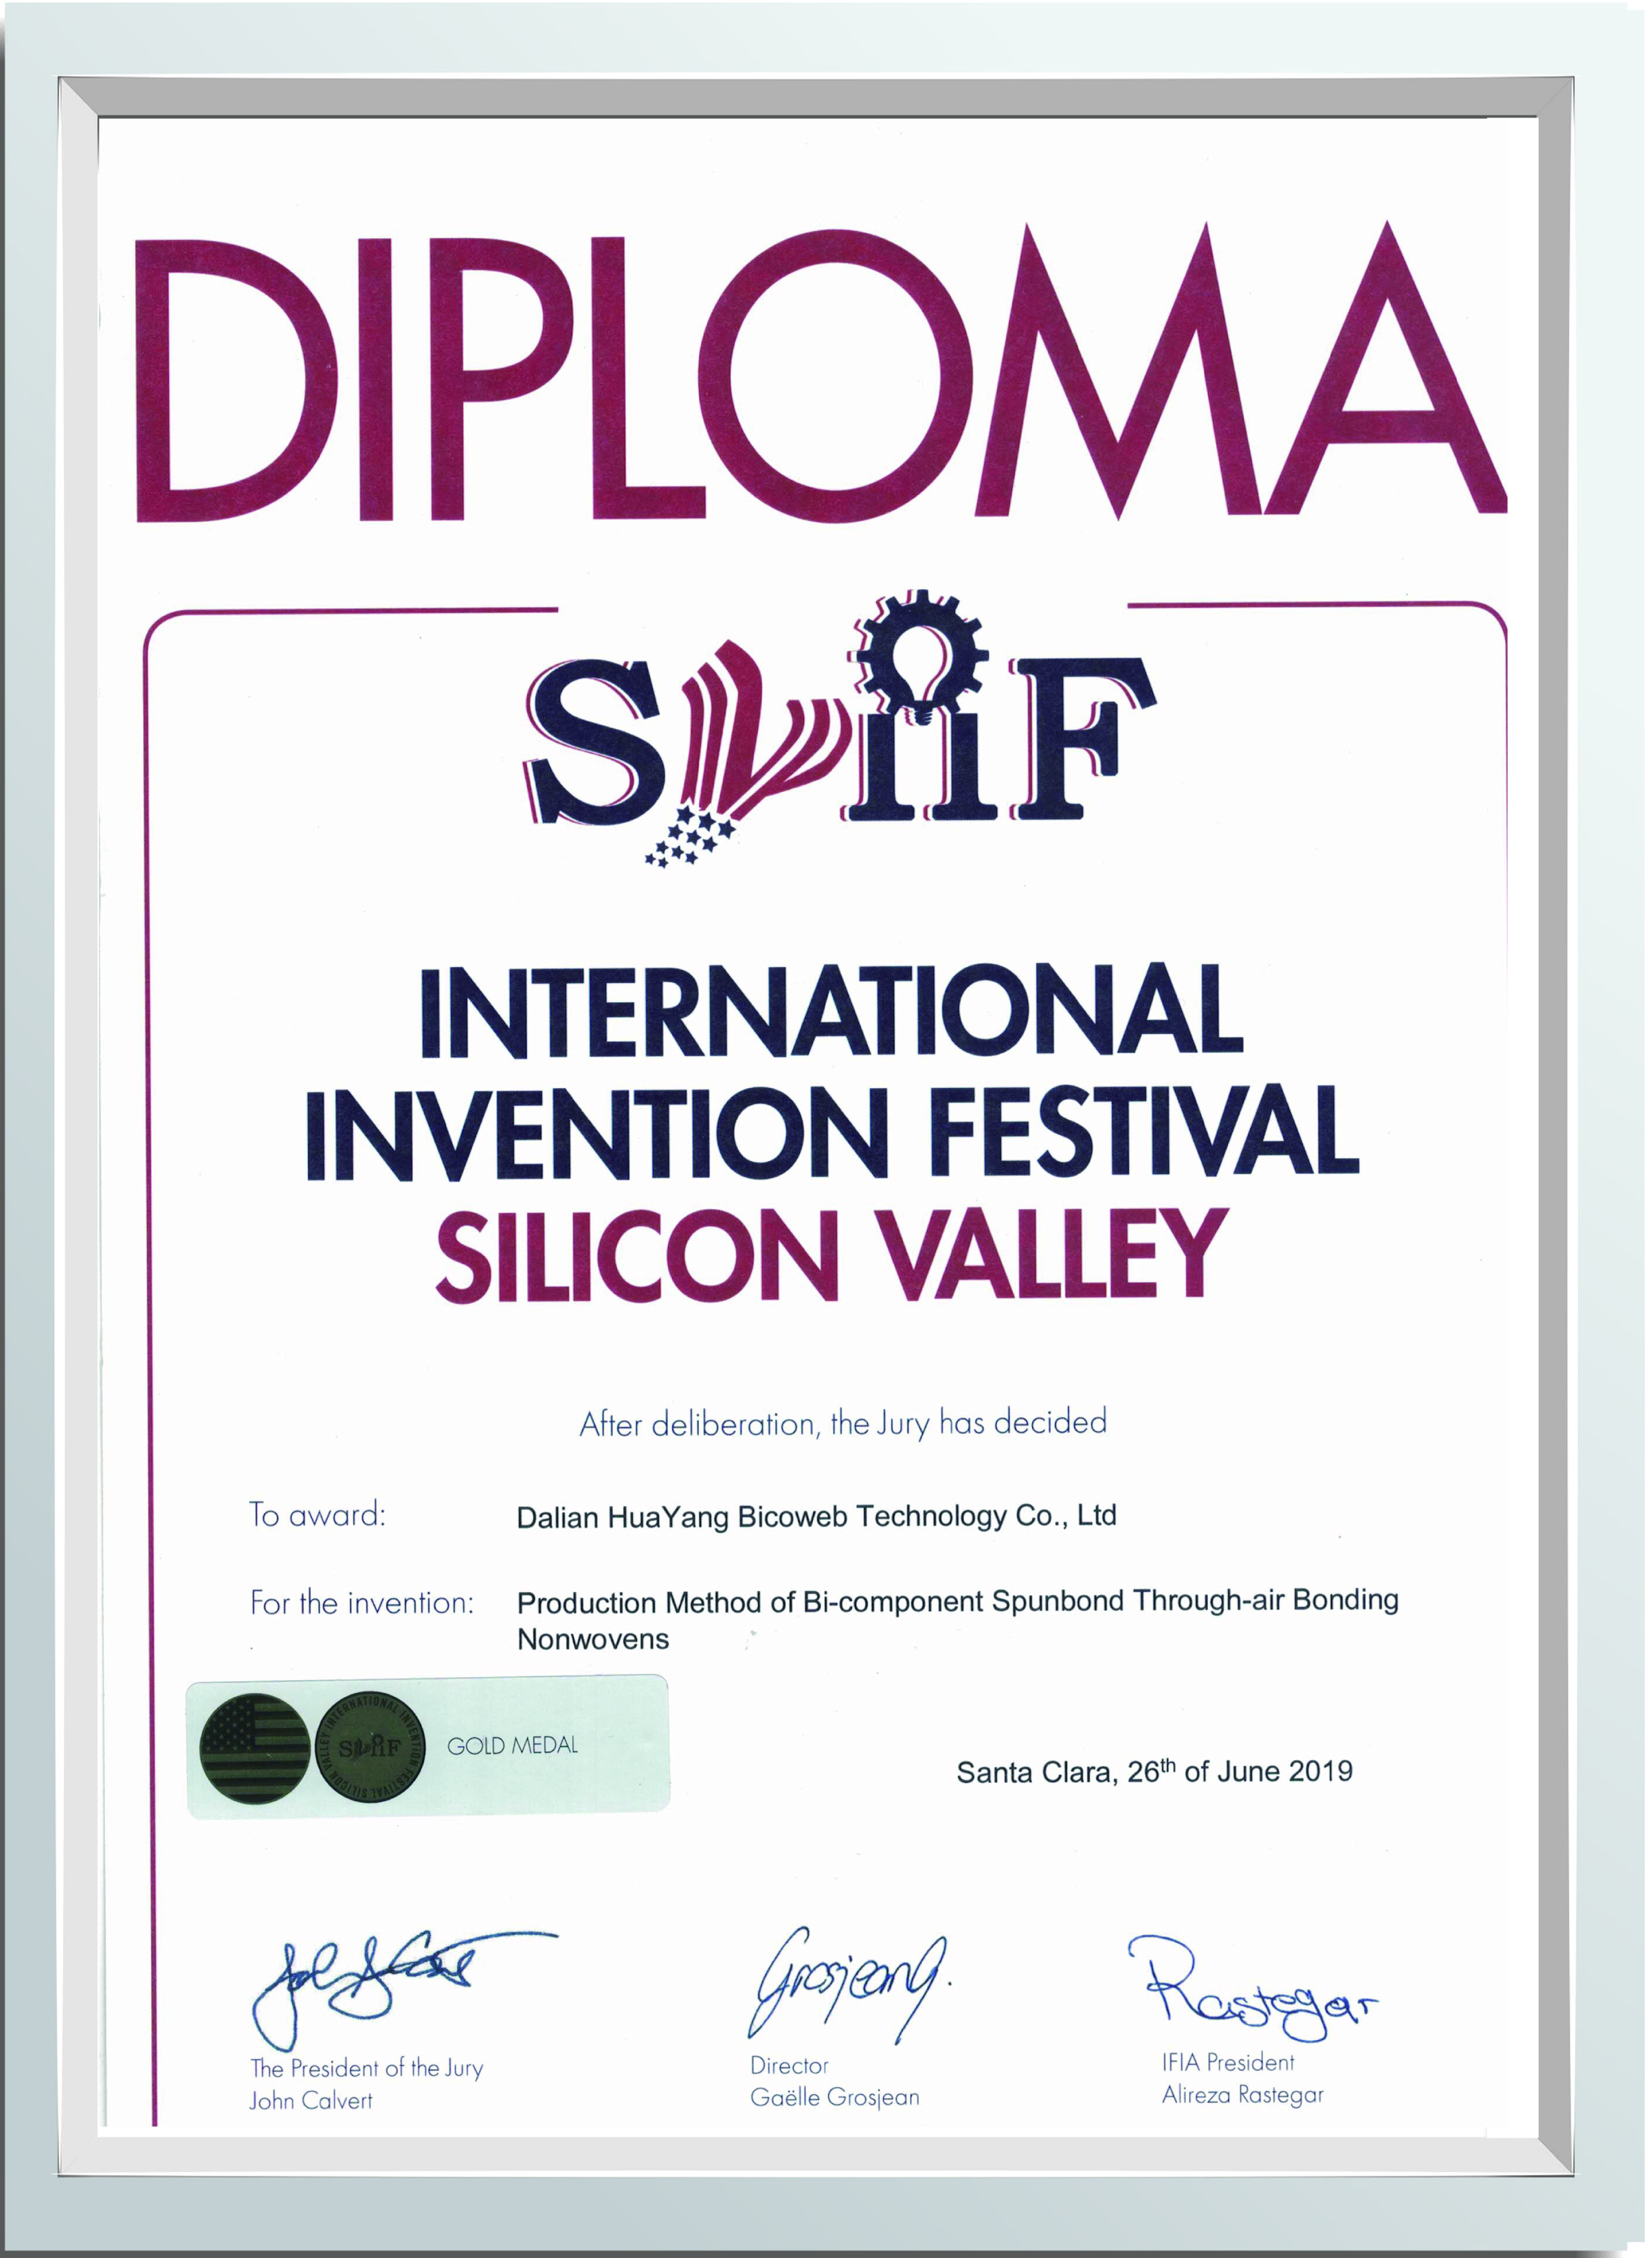 Gold Medal at the Silicon Valley International Invention Festival